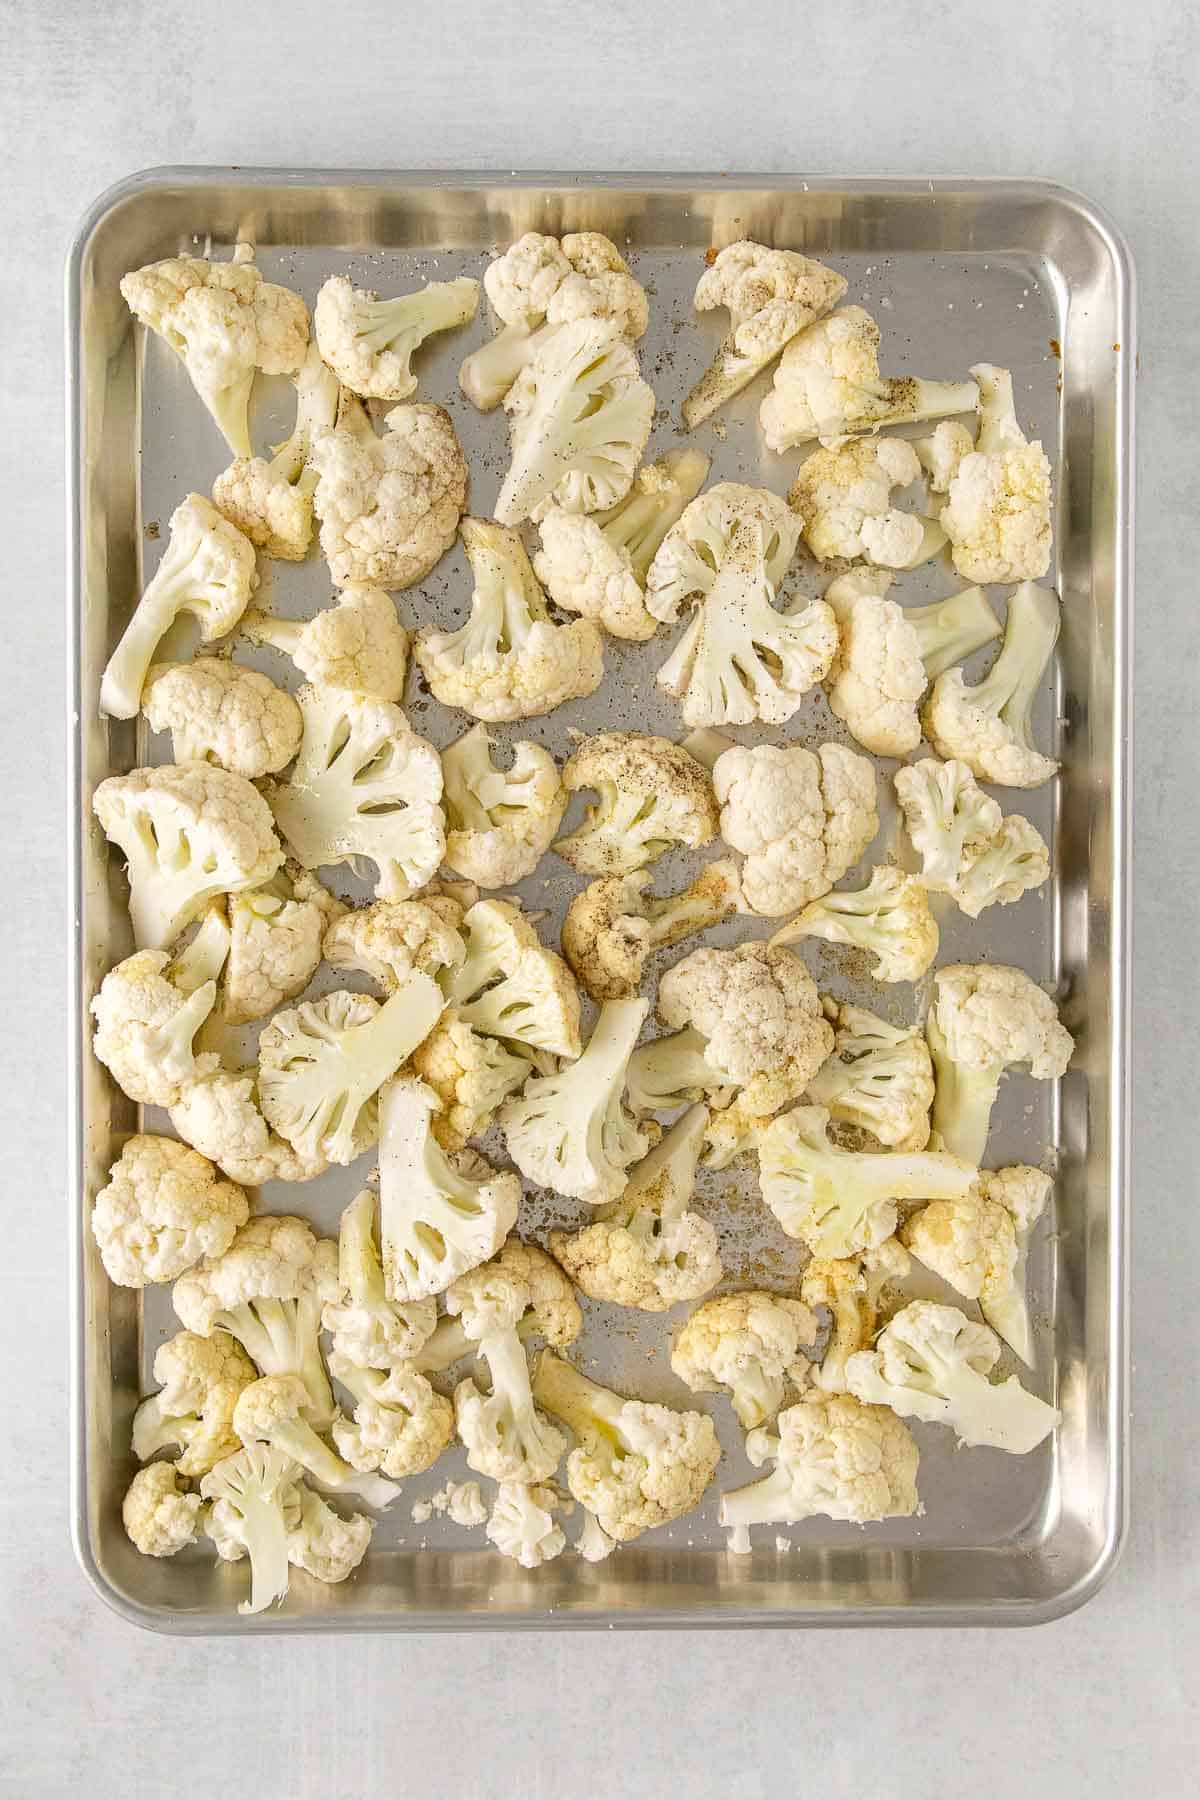 Uncooked cauliflower florets on baking sheet with seasonings sprinkled over.